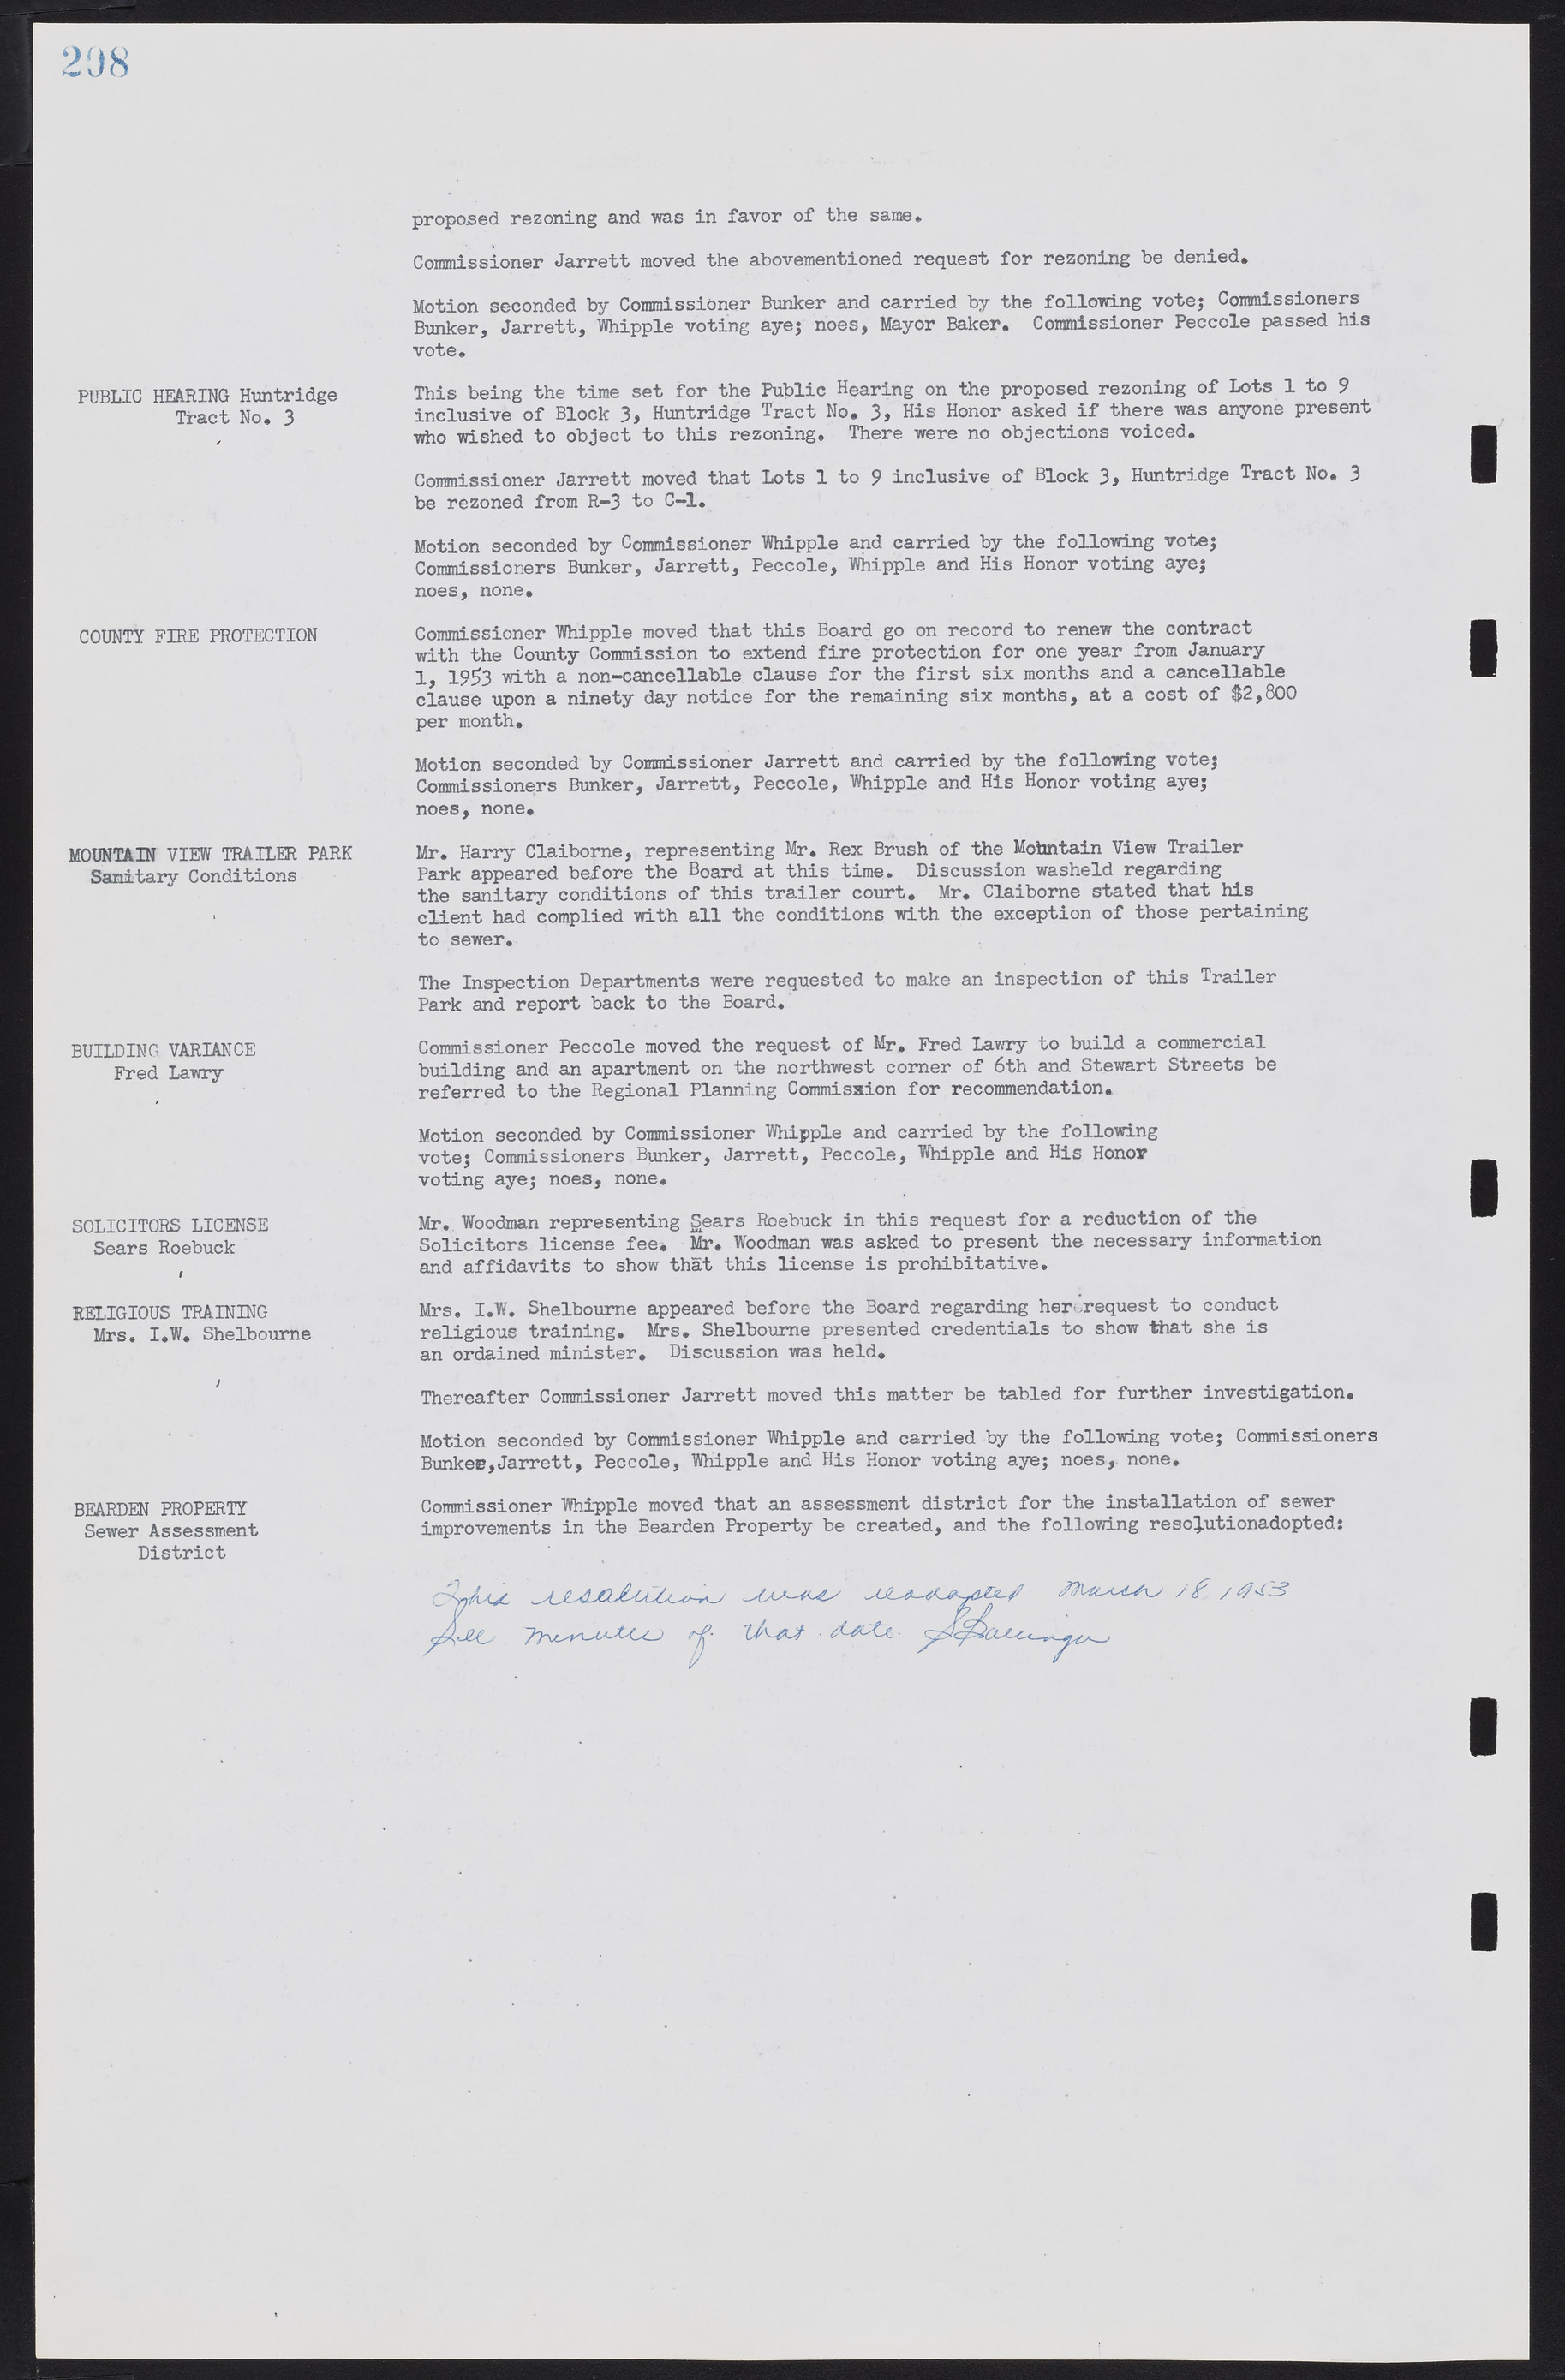 Las Vegas City Commission Minutes, May 26, 1952 to February 17, 1954, lvc000008-222